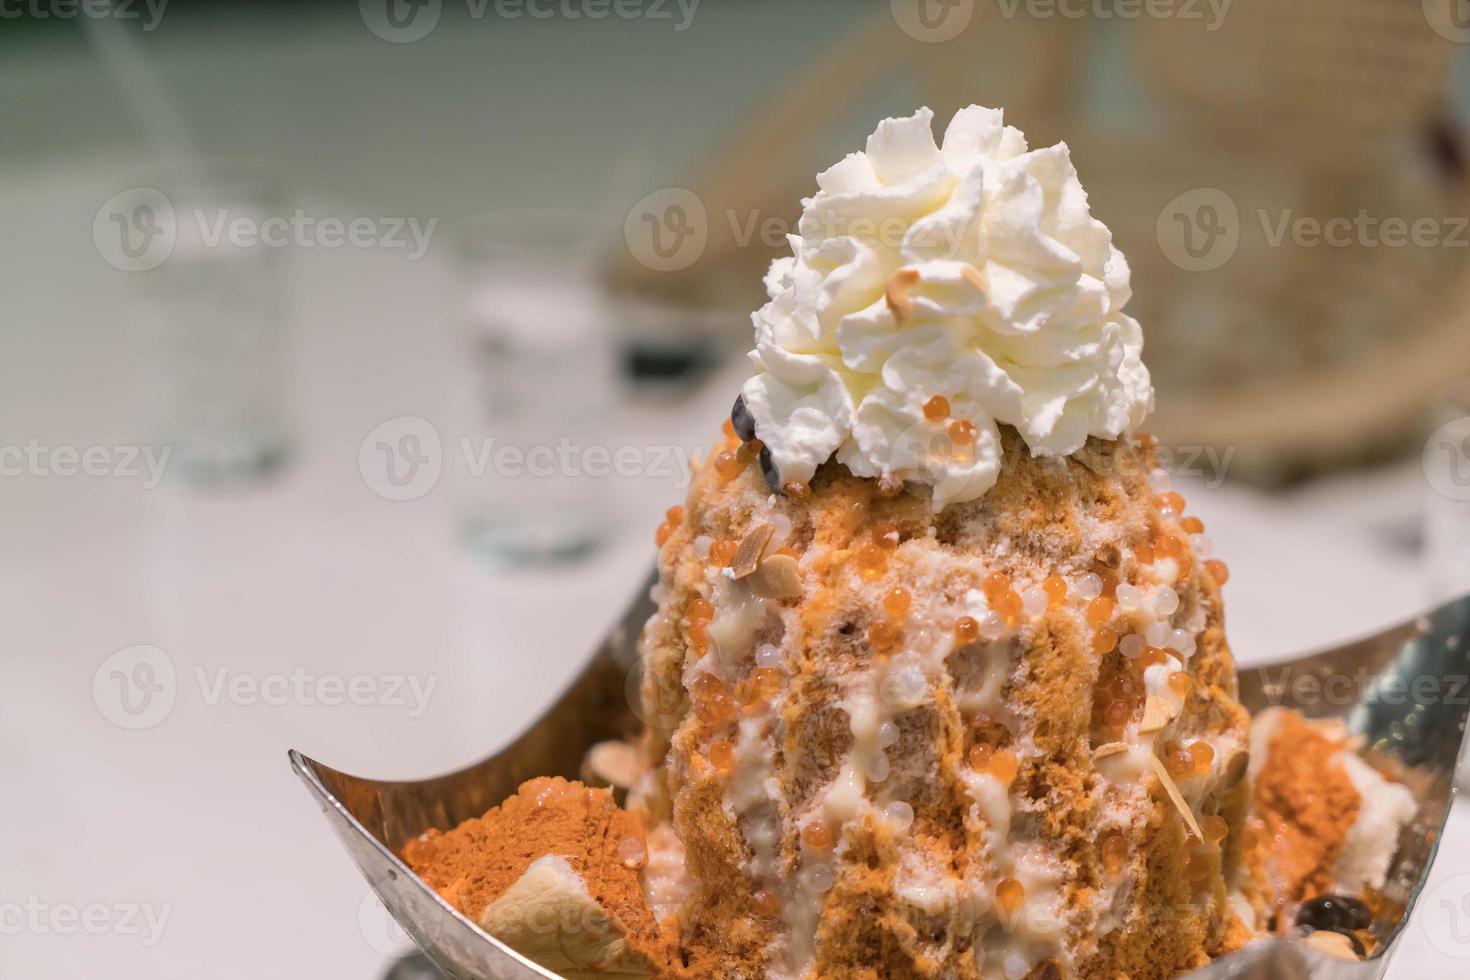 Milk tea shaved ice with jelly and whipped cream - dessert photo